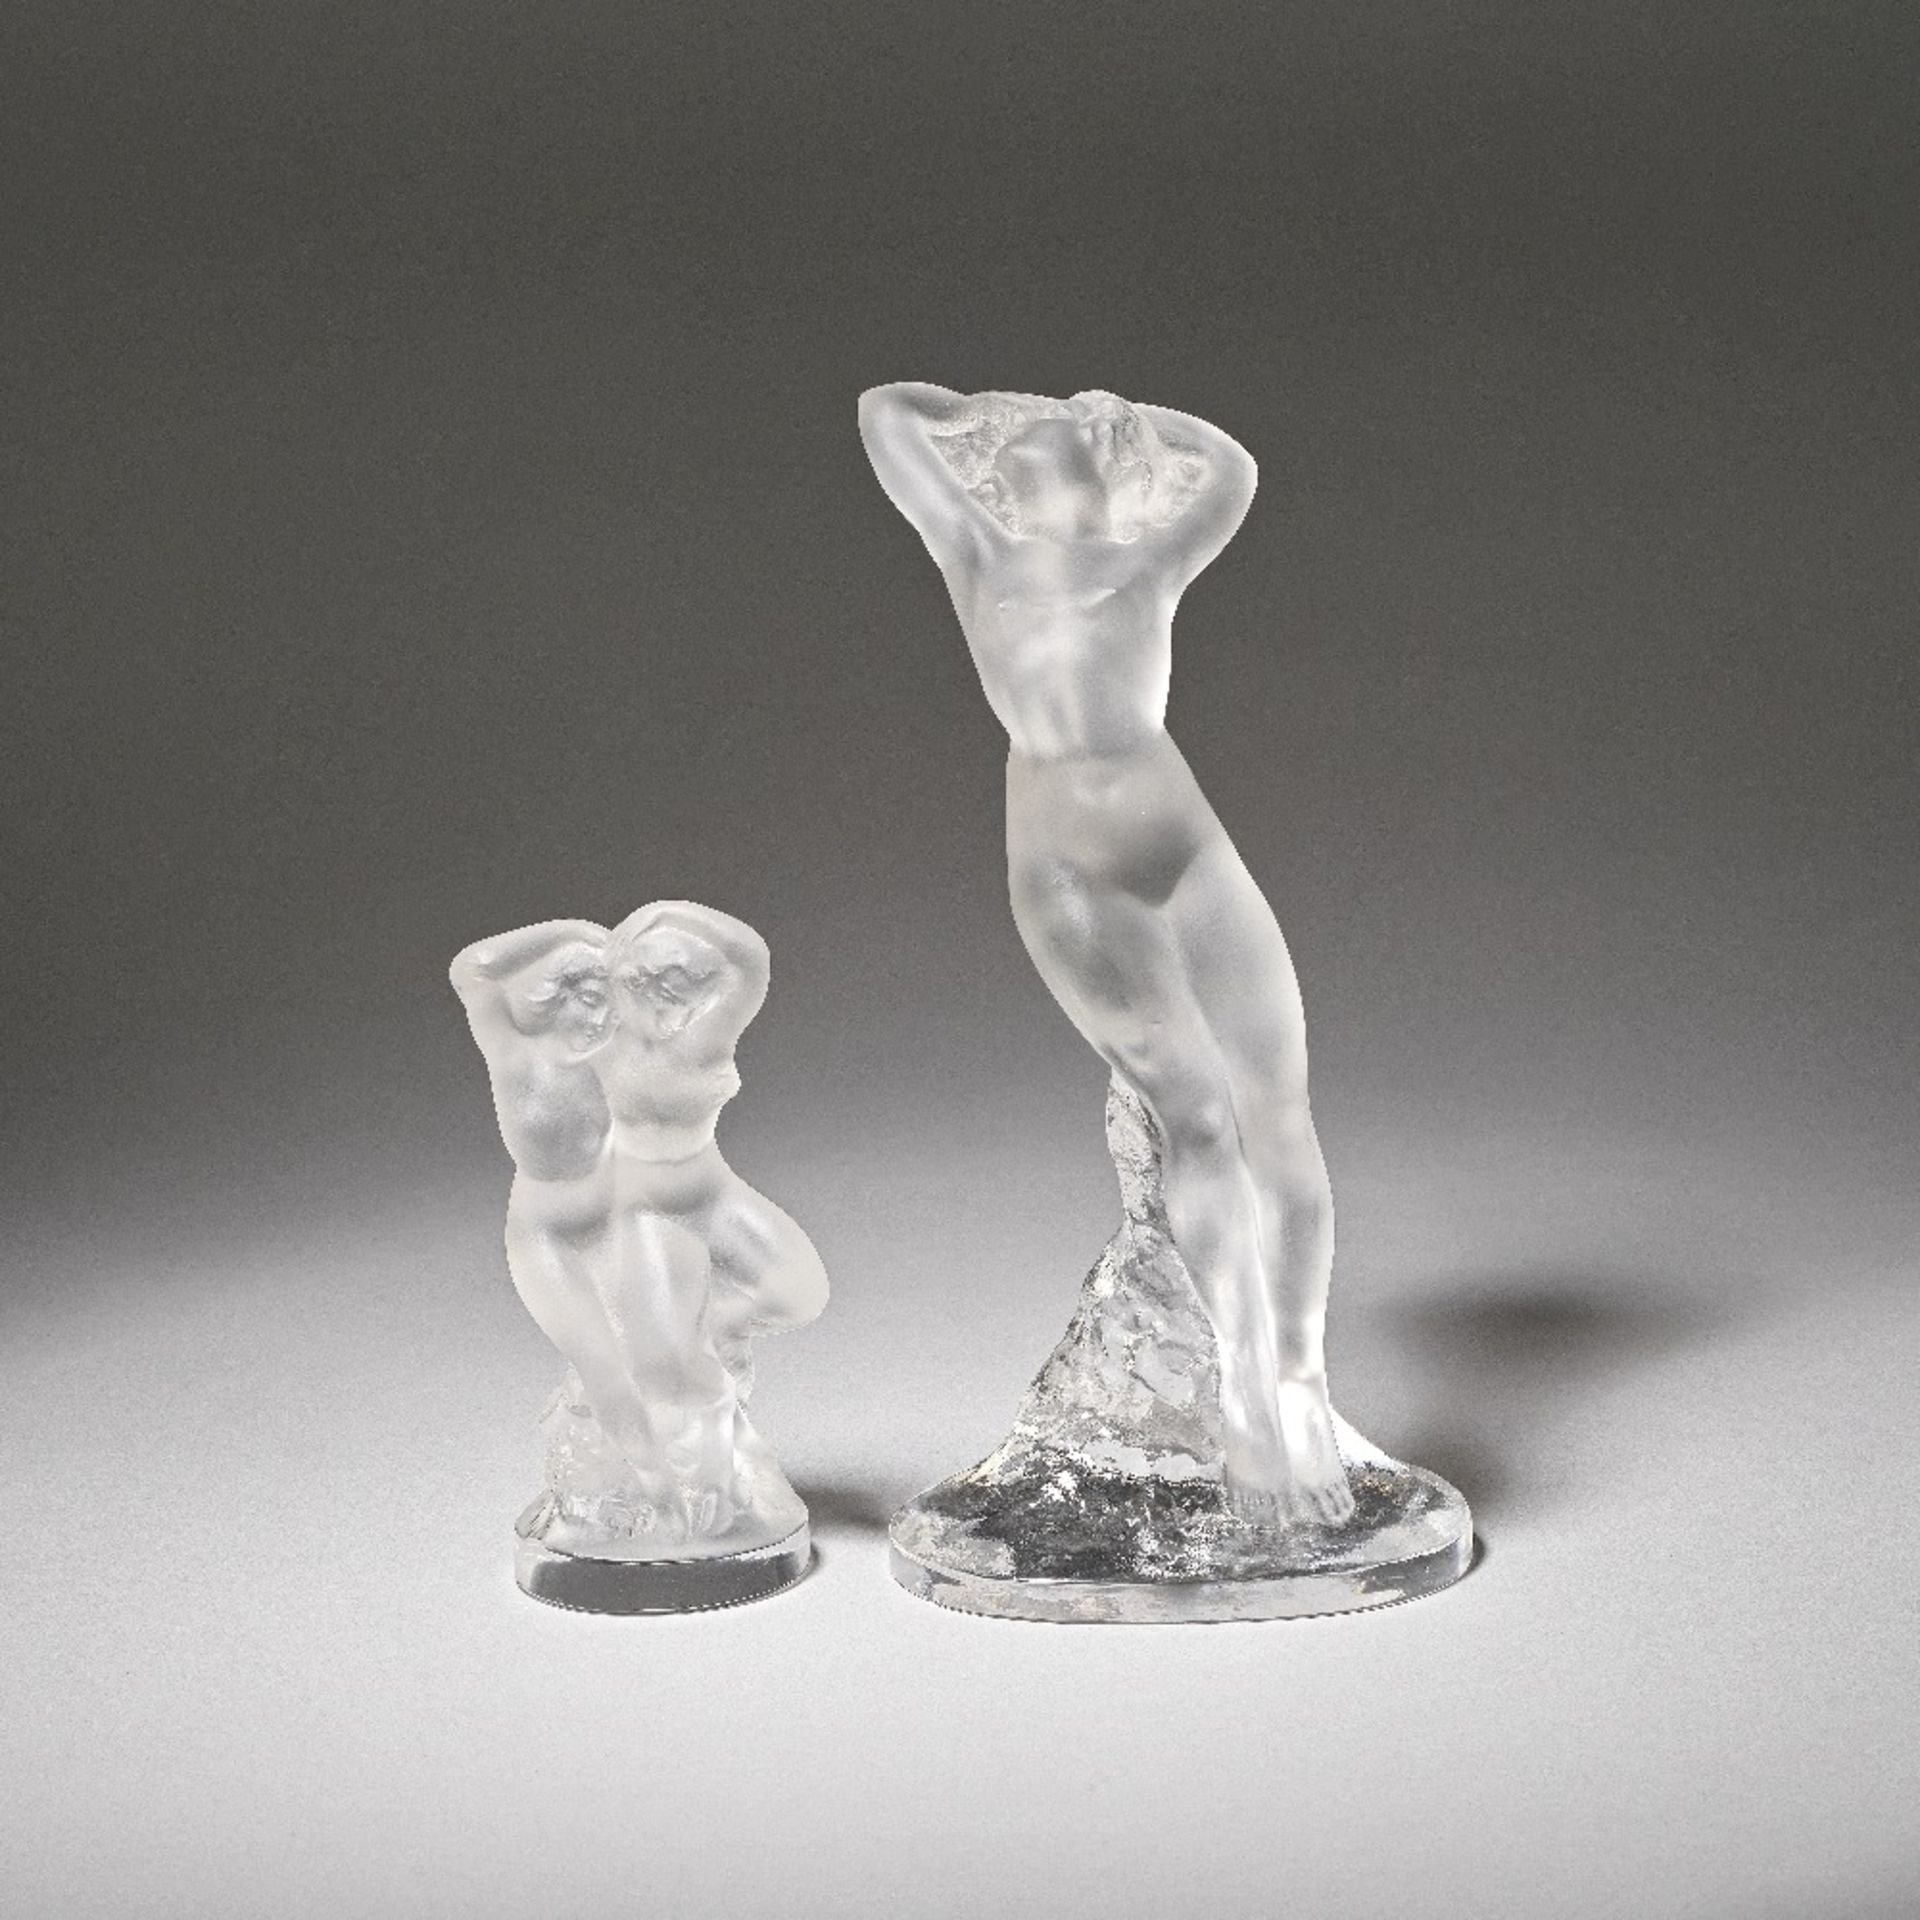 REN&#201; LALIQUE (FRENCH, 1860-1945) Two statuettes, early 21st century